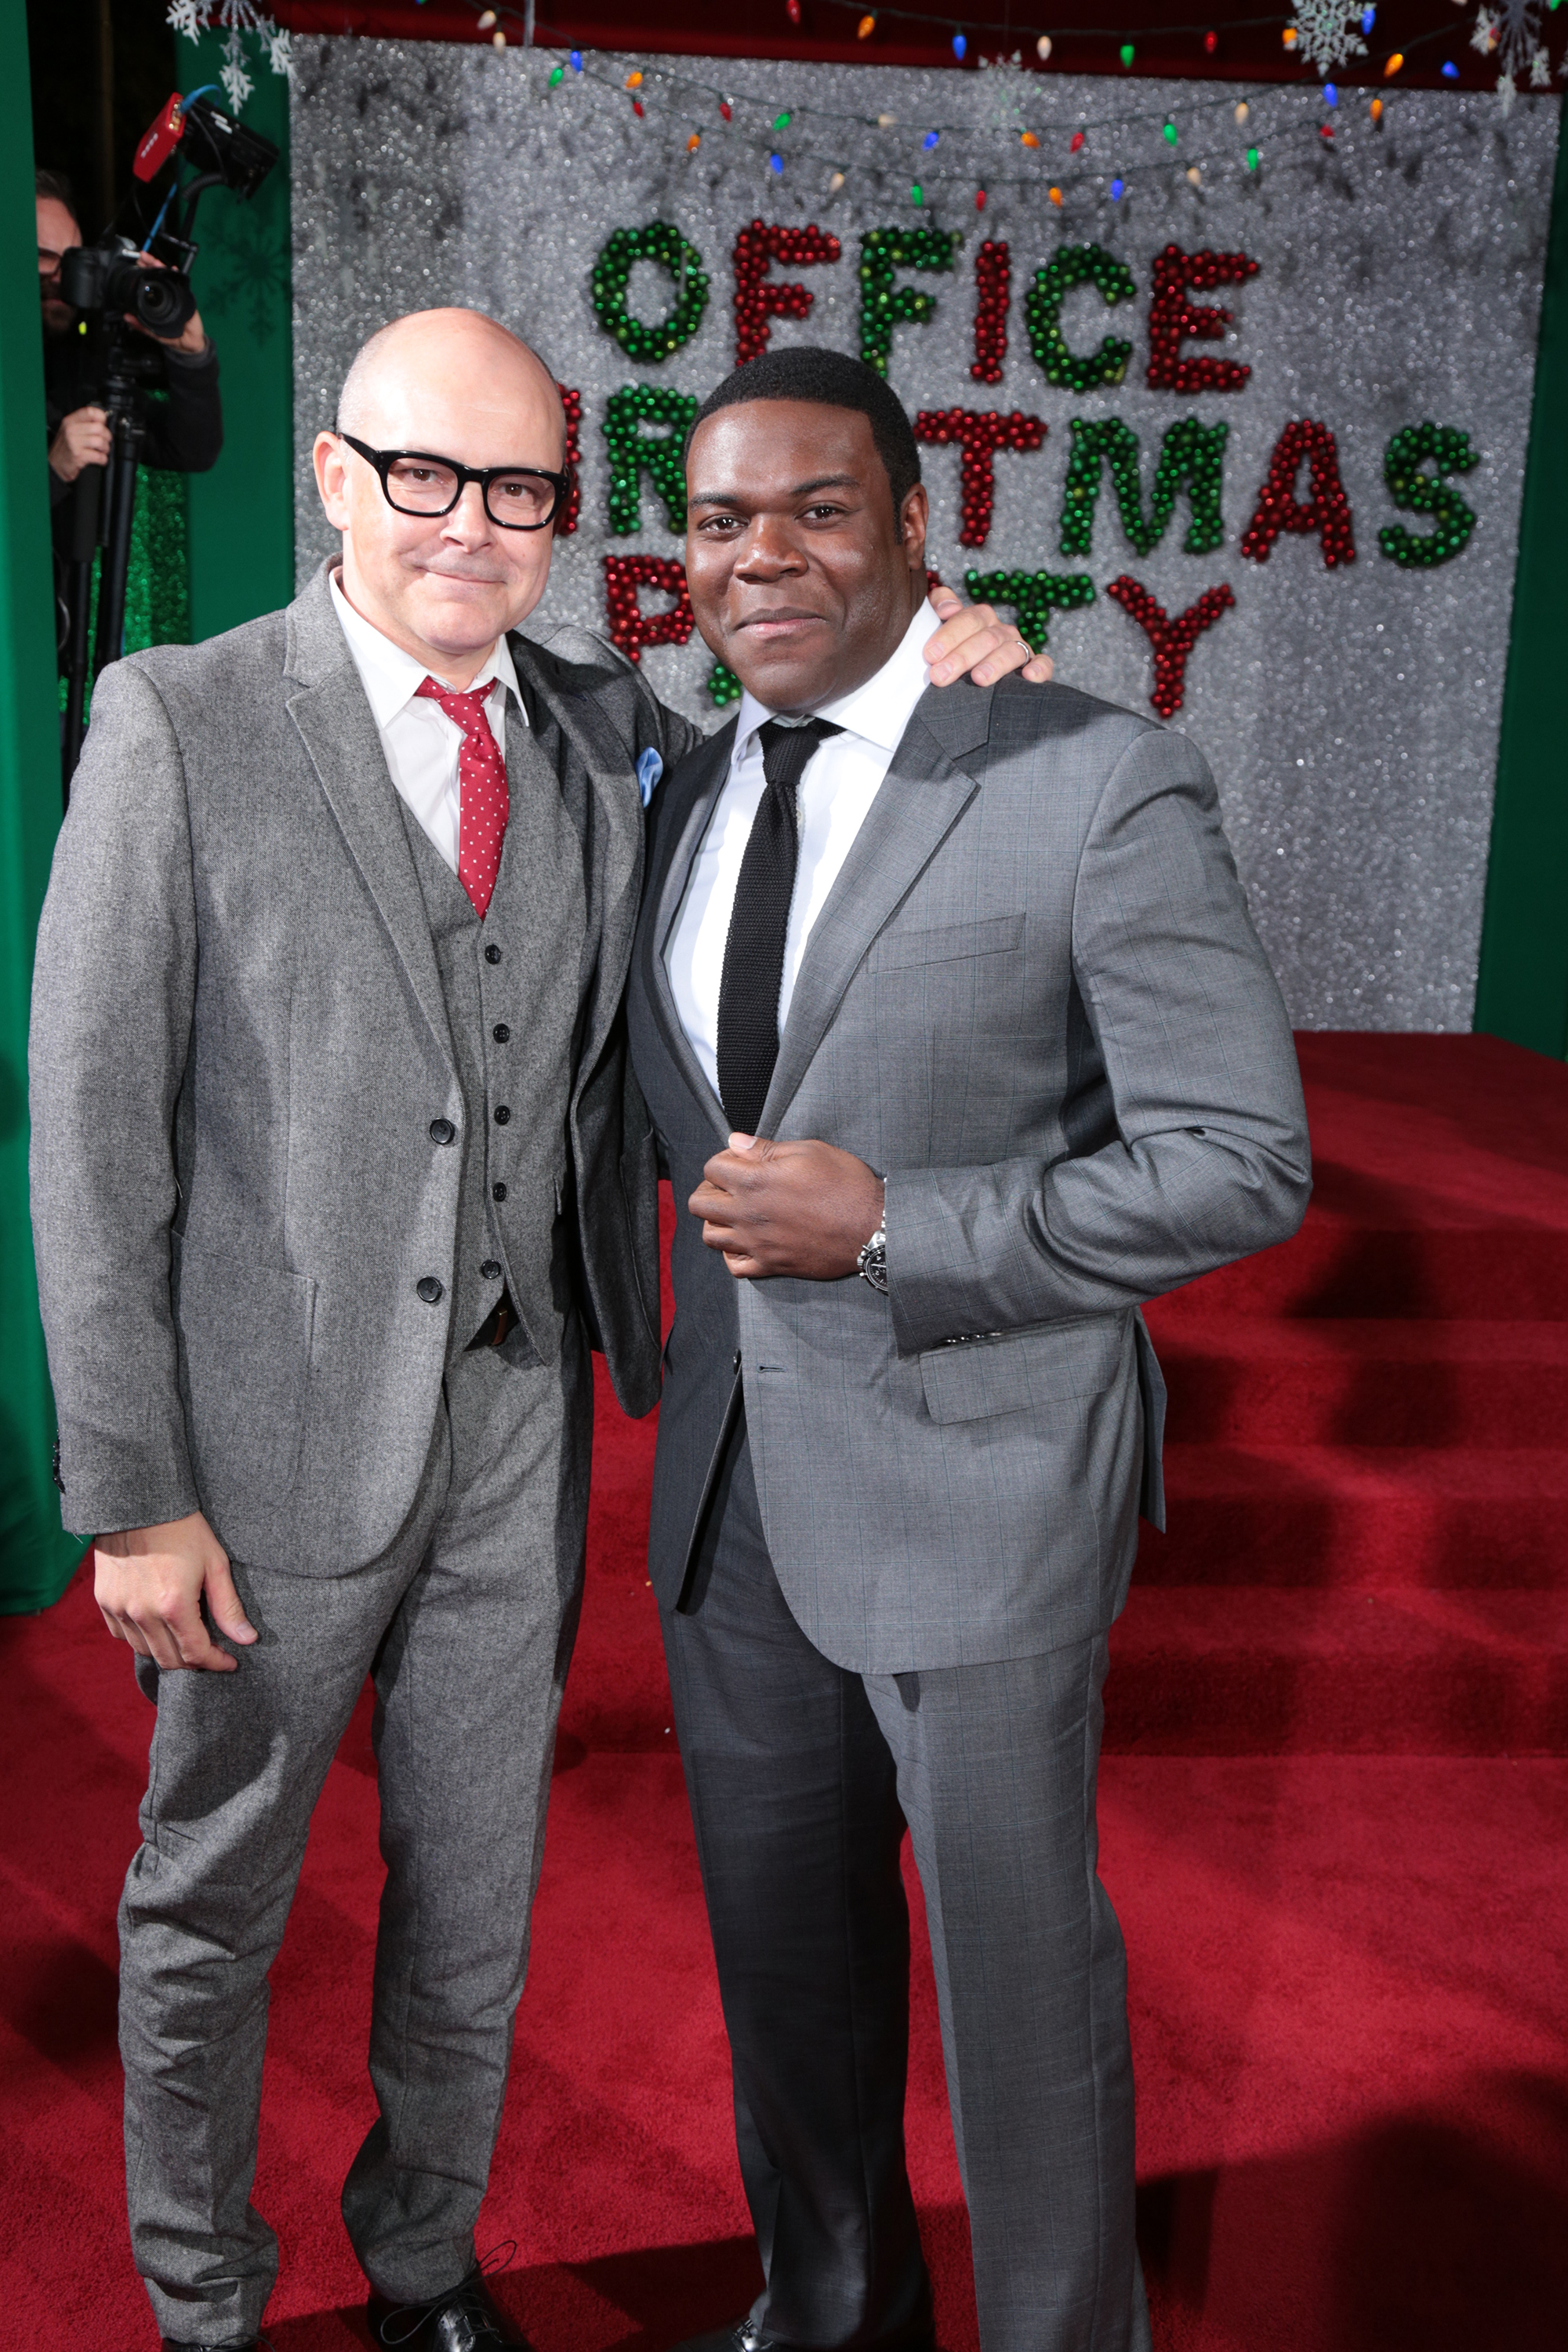 Rob Corddry and Sam Richardson pose as Paramount Pictures presents the Los Angeles premiere of "Office Christmas Party" at the Regency Village Theater in Los Angeles, CA on Wednesday, December 7, 2016  (Photo: Alex J. Berliner / ABImages)